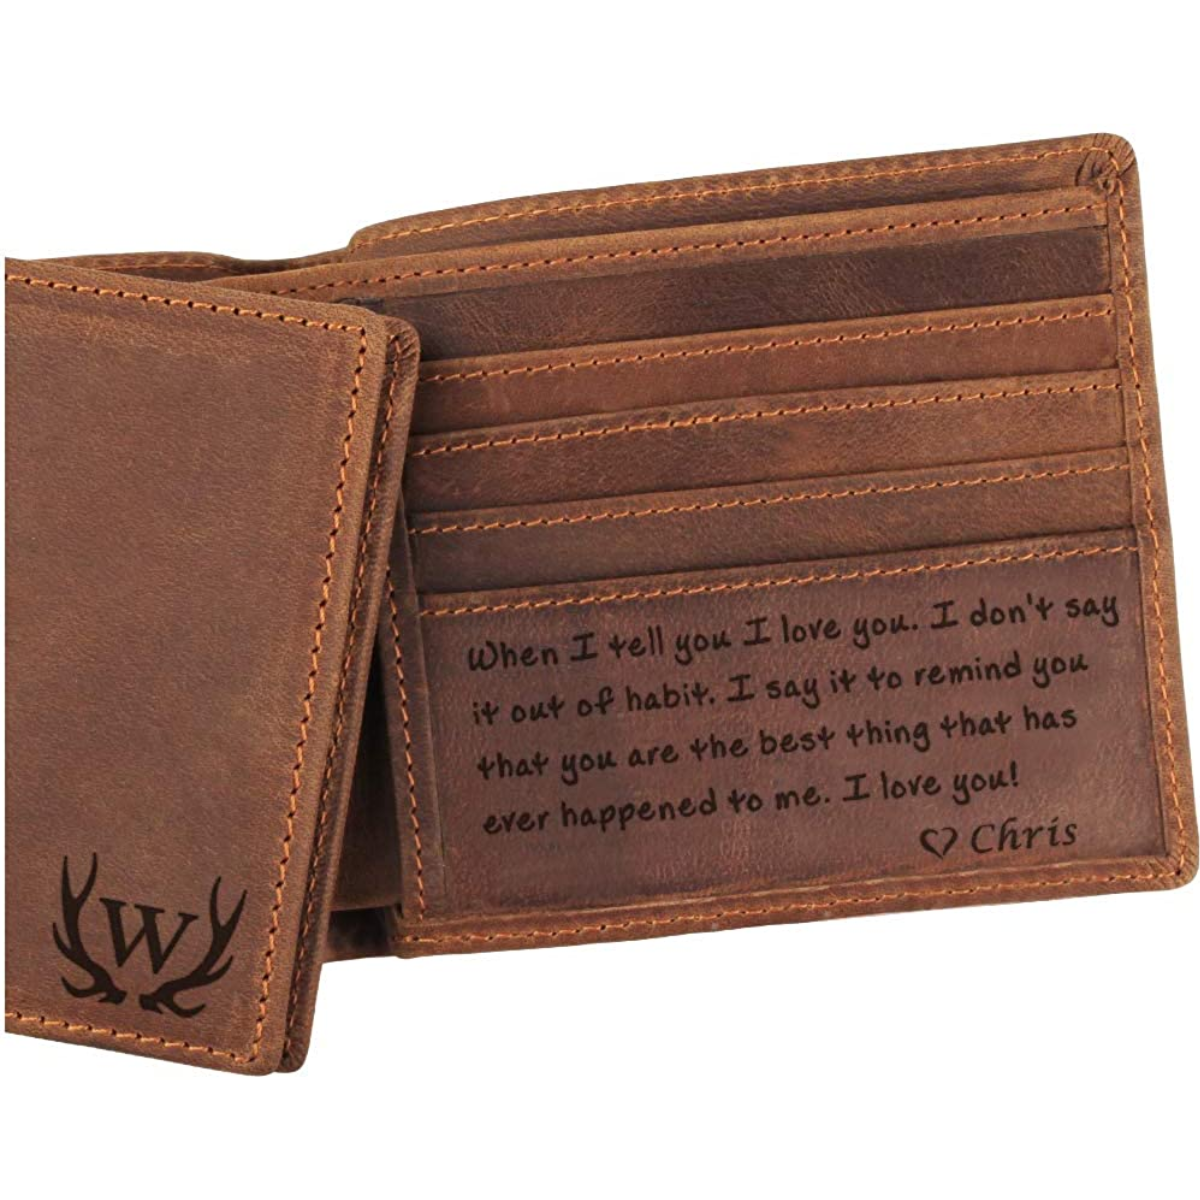 1. Personalized Leather Wallet: The Unique and Thoughtful 41st Anniversary Gift for Him